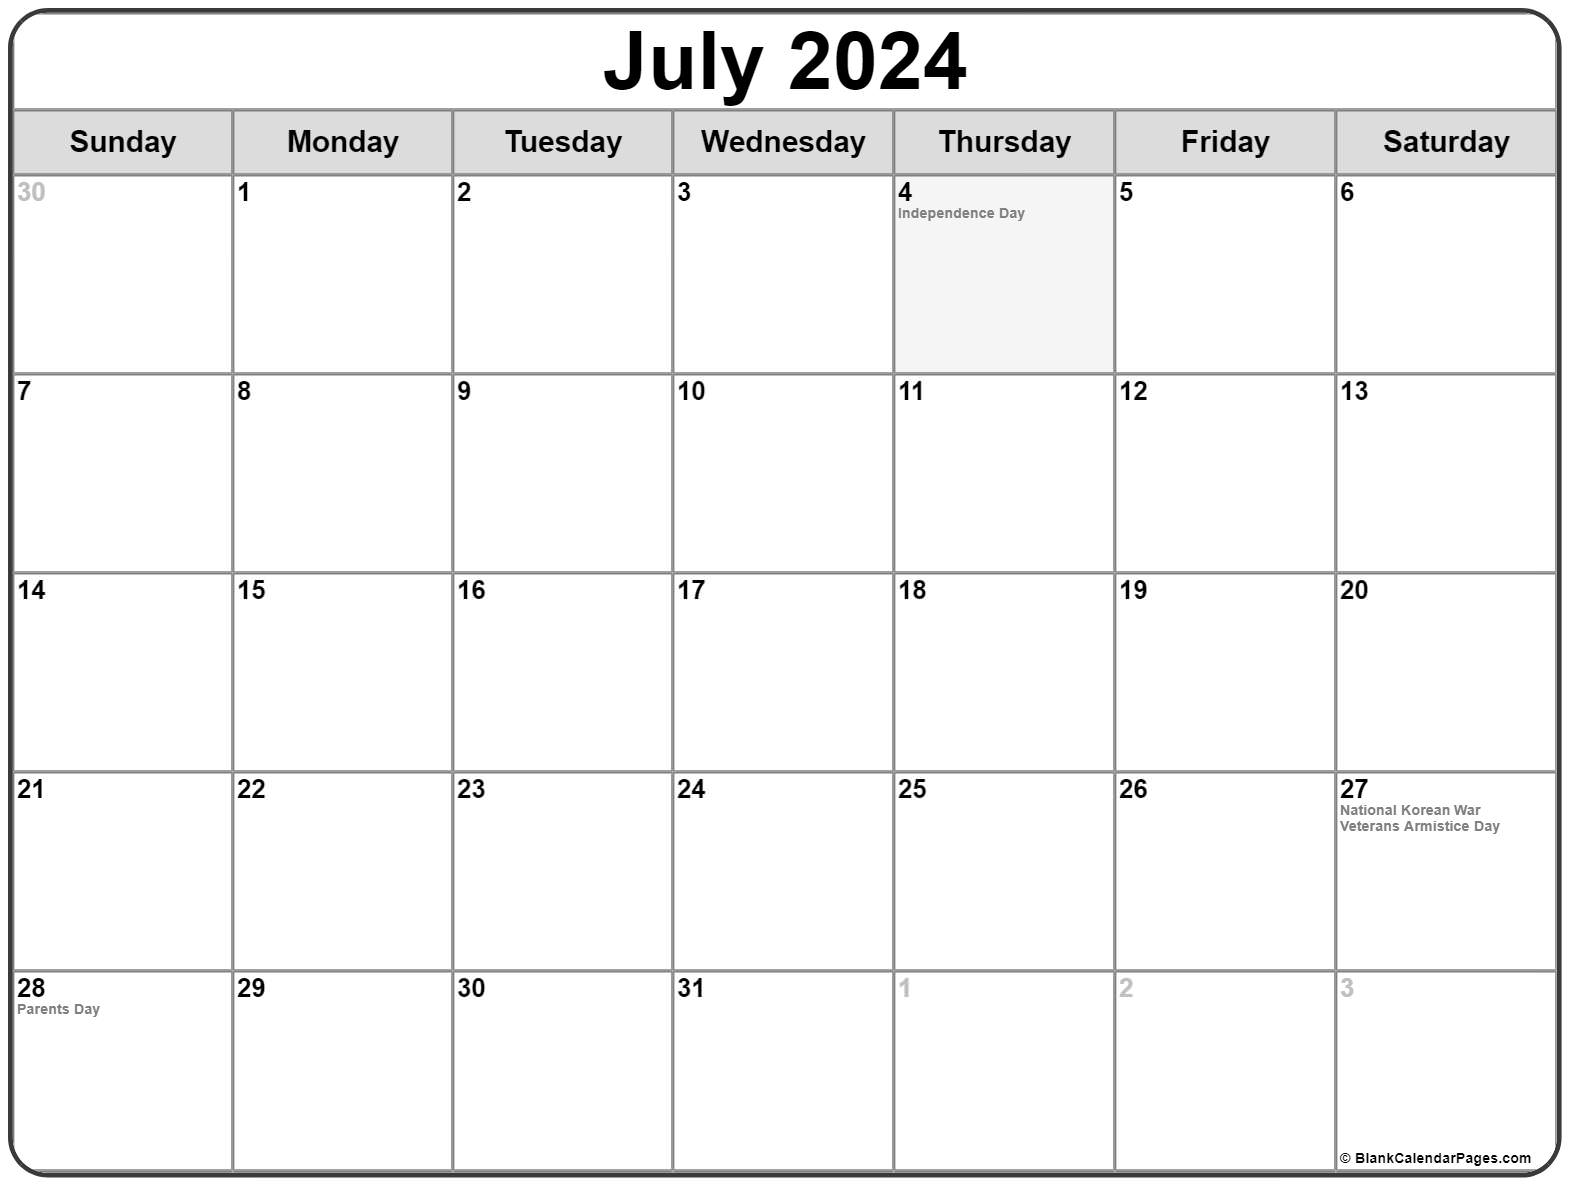 July 2021 calendar with holidays